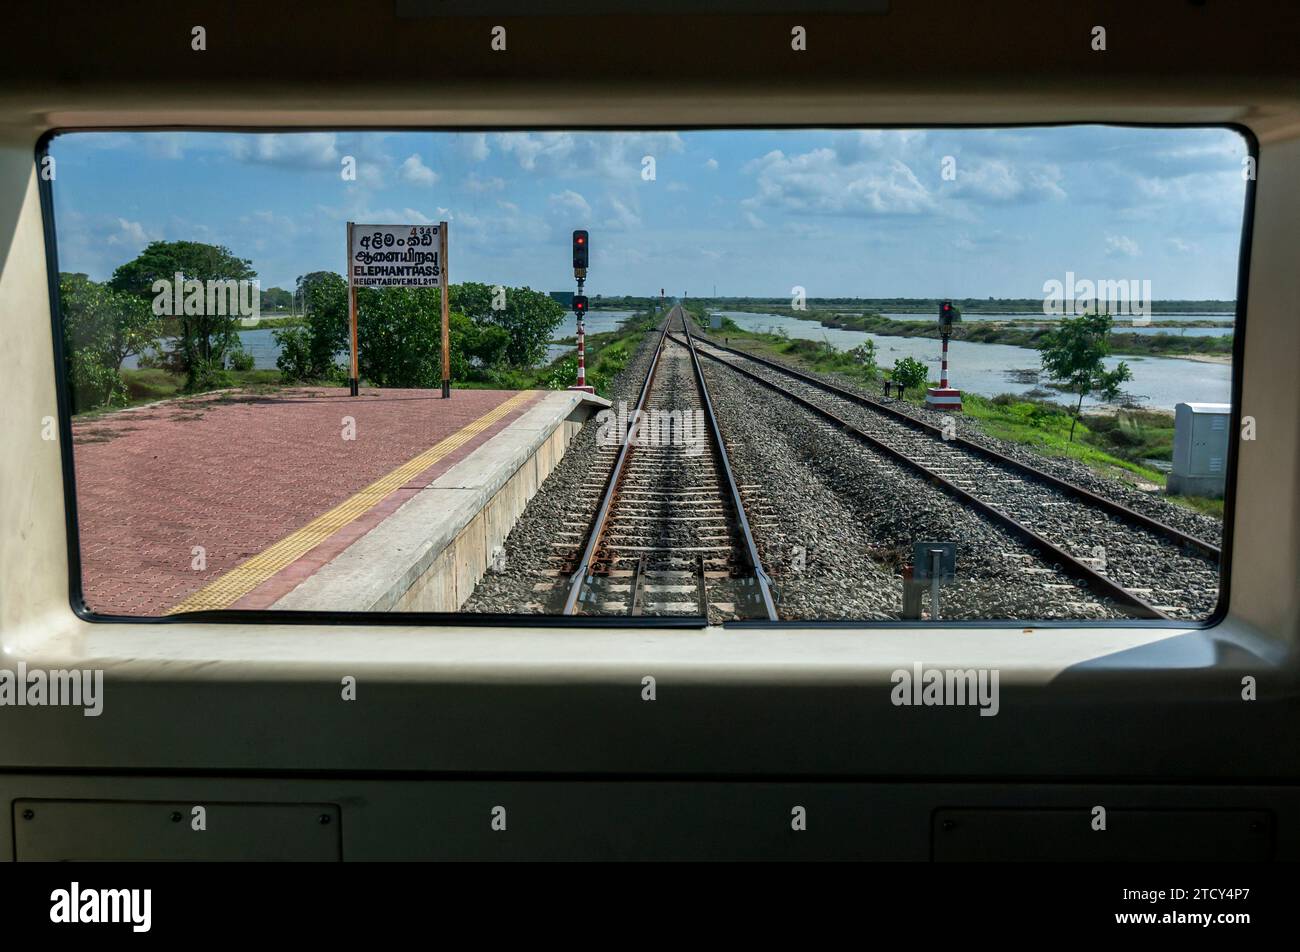 The Anuradhapura to Jaffna train passes through Elephant Pass station, and area made infamous during the Sri Lankan civil war. Stock Photo